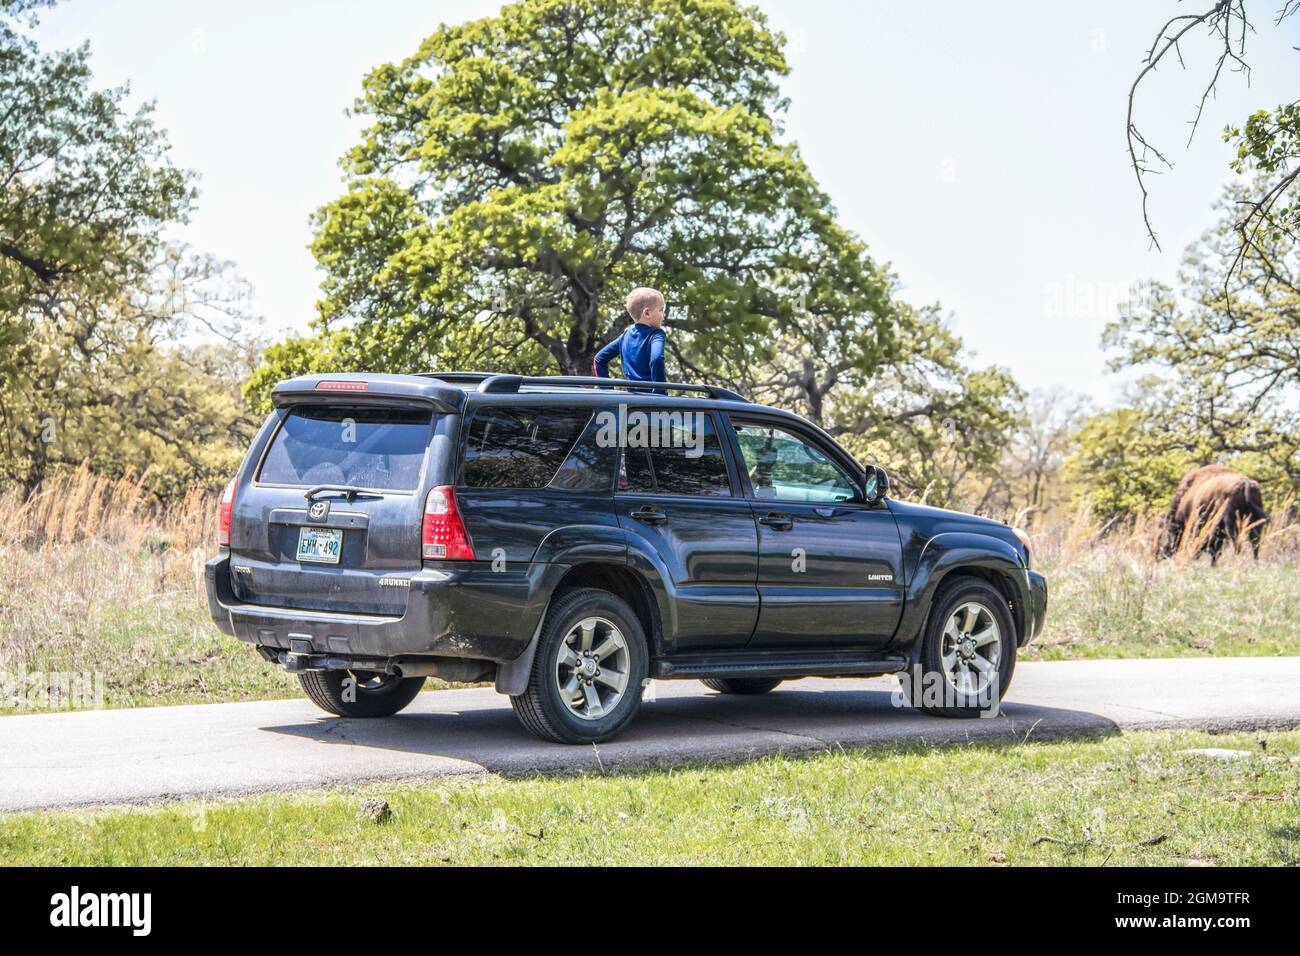 04-17-2020 Bartlesville USA - Small boy standing in sunroof of SUV driving through wildlife park with blurred bison grazing among trees Stock Photo